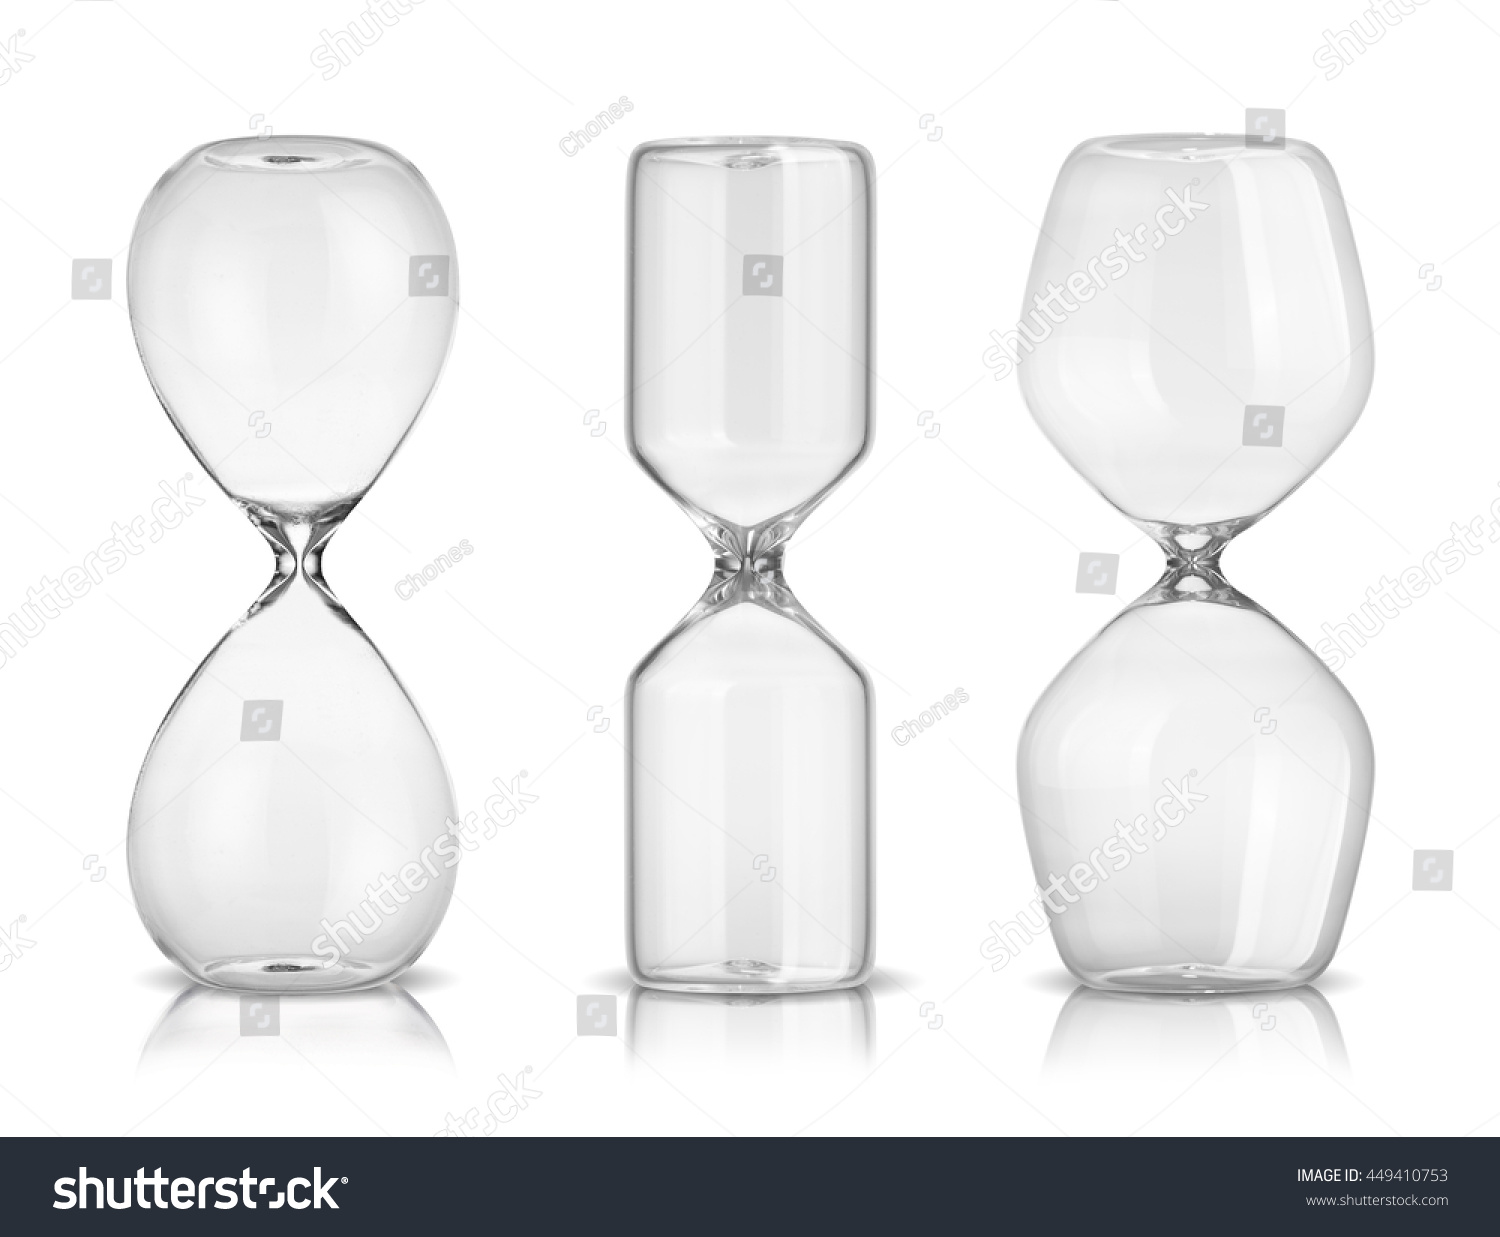 Empty hourglasses isolated on white background #449410753